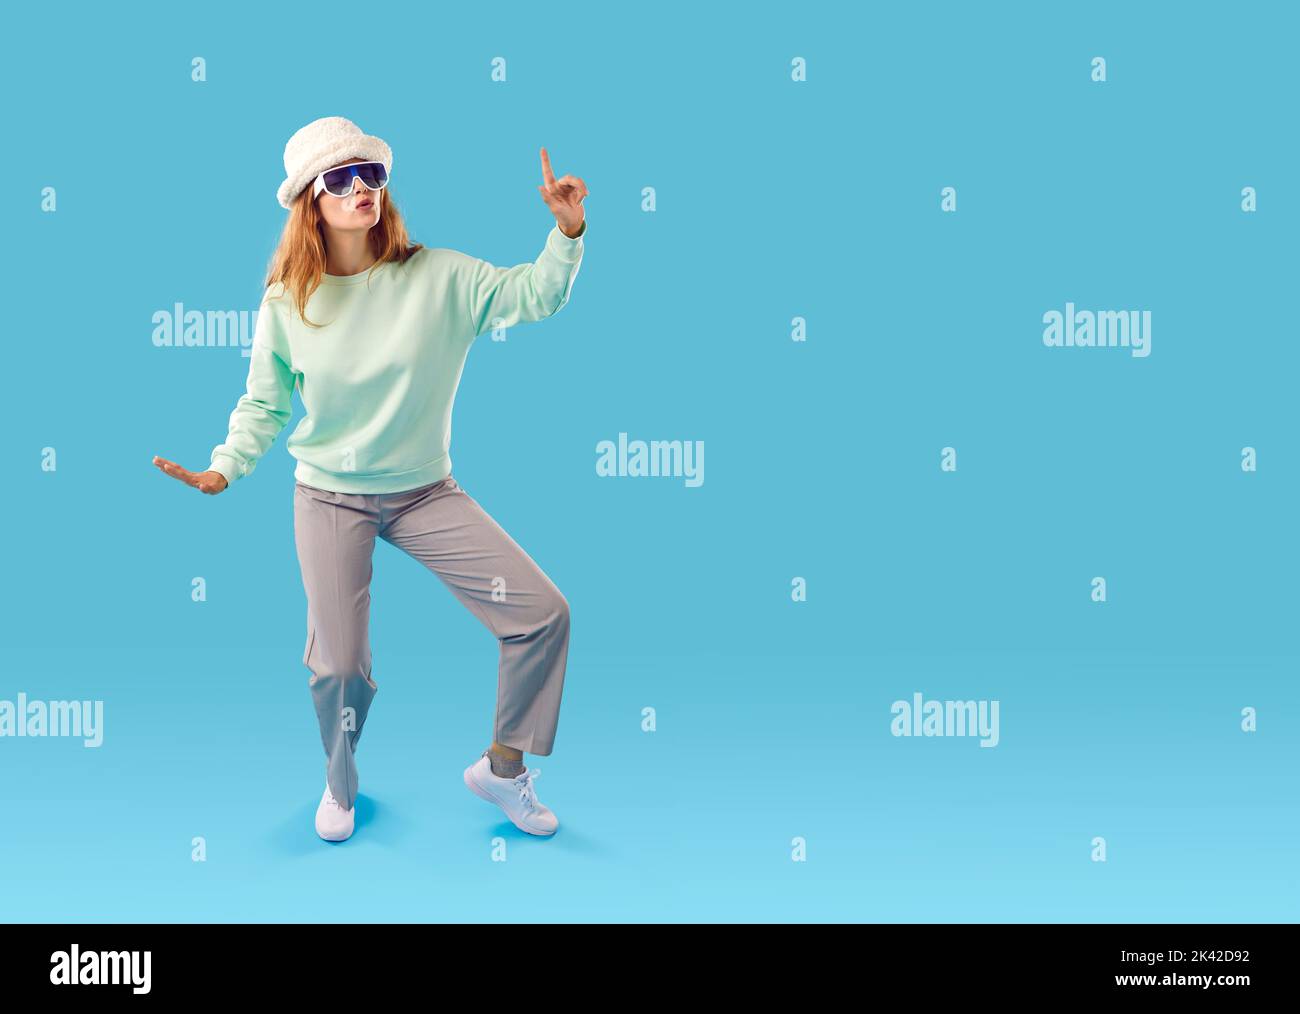 Funny happy young woman in fashionable outfit dancing on blue copy space background Stock Photo